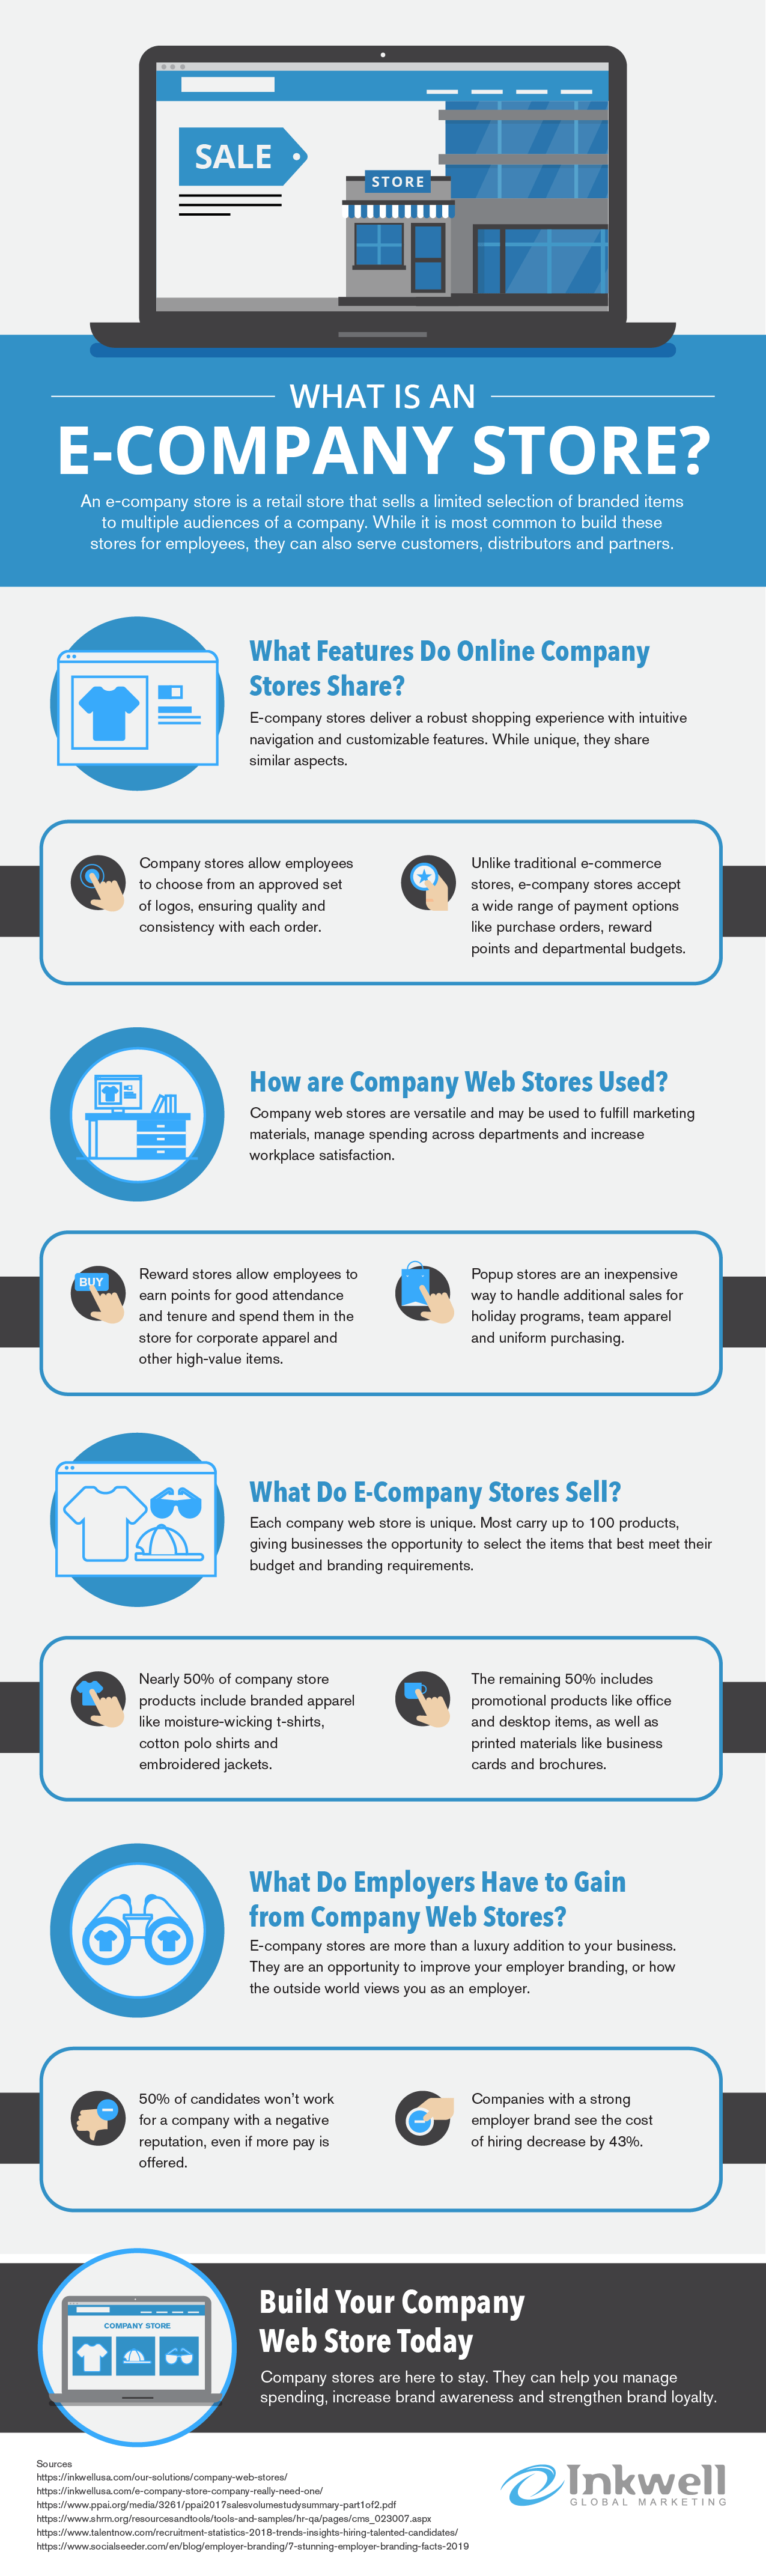 What is an E-Company Store?